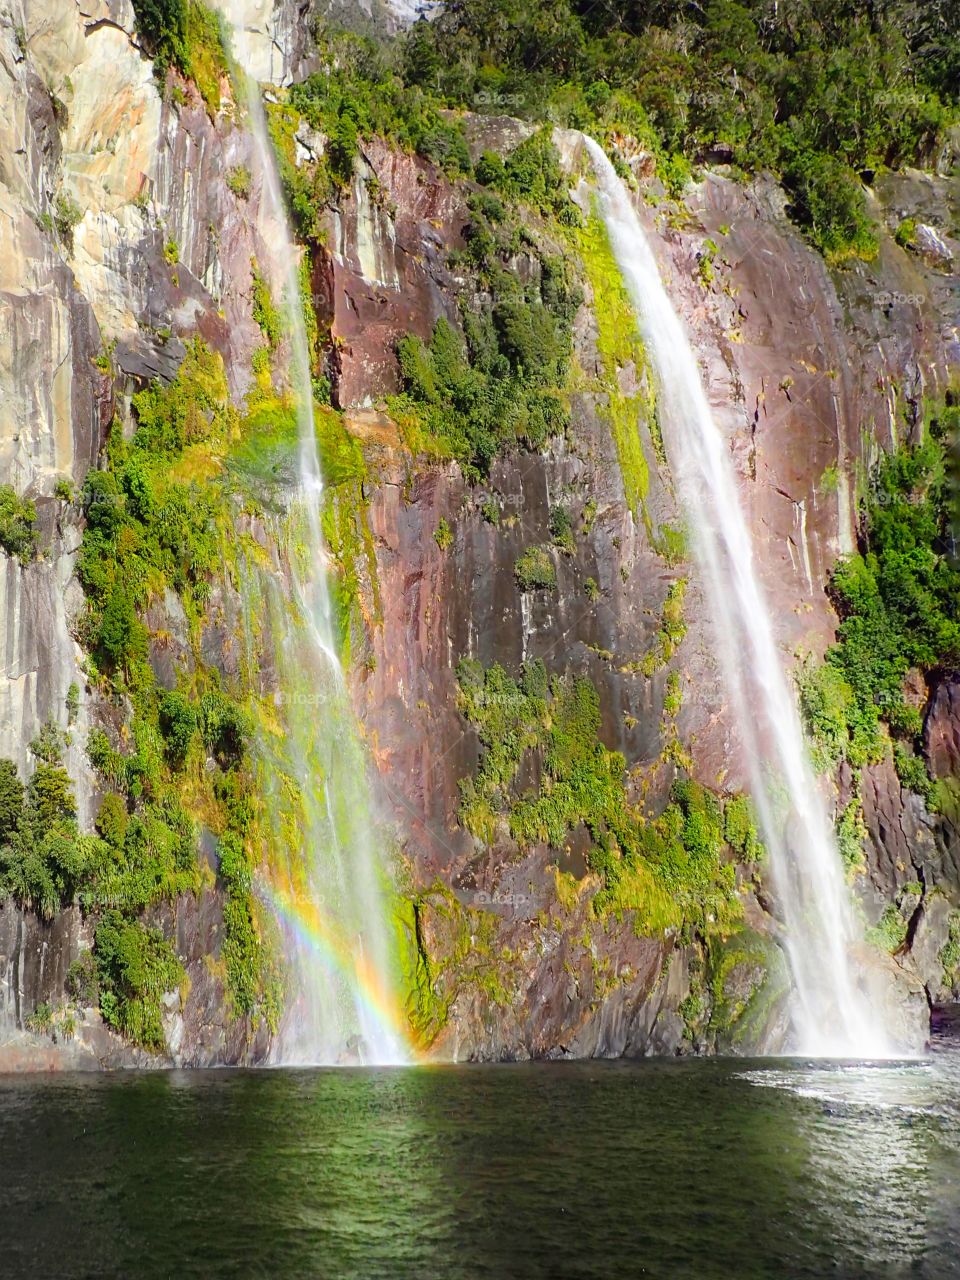 Beautiful Waterfall on Summer. Nature have the ownway to express the beauty.
This waterfall was looked shining because the sunlight and the rainbow.